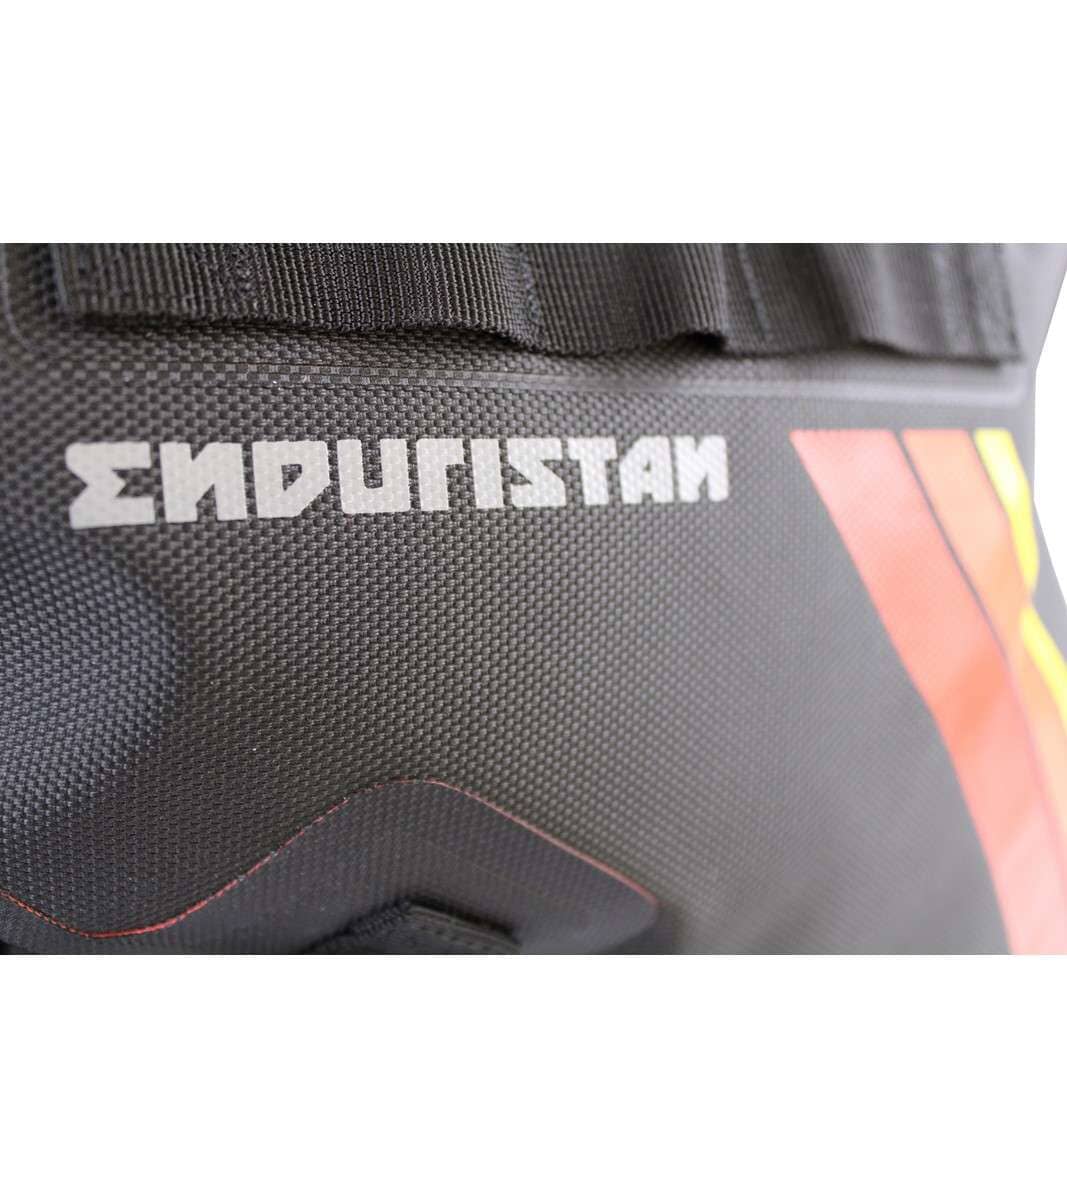 Fire Limited Edition Blizzard Saddle Bags (Large)